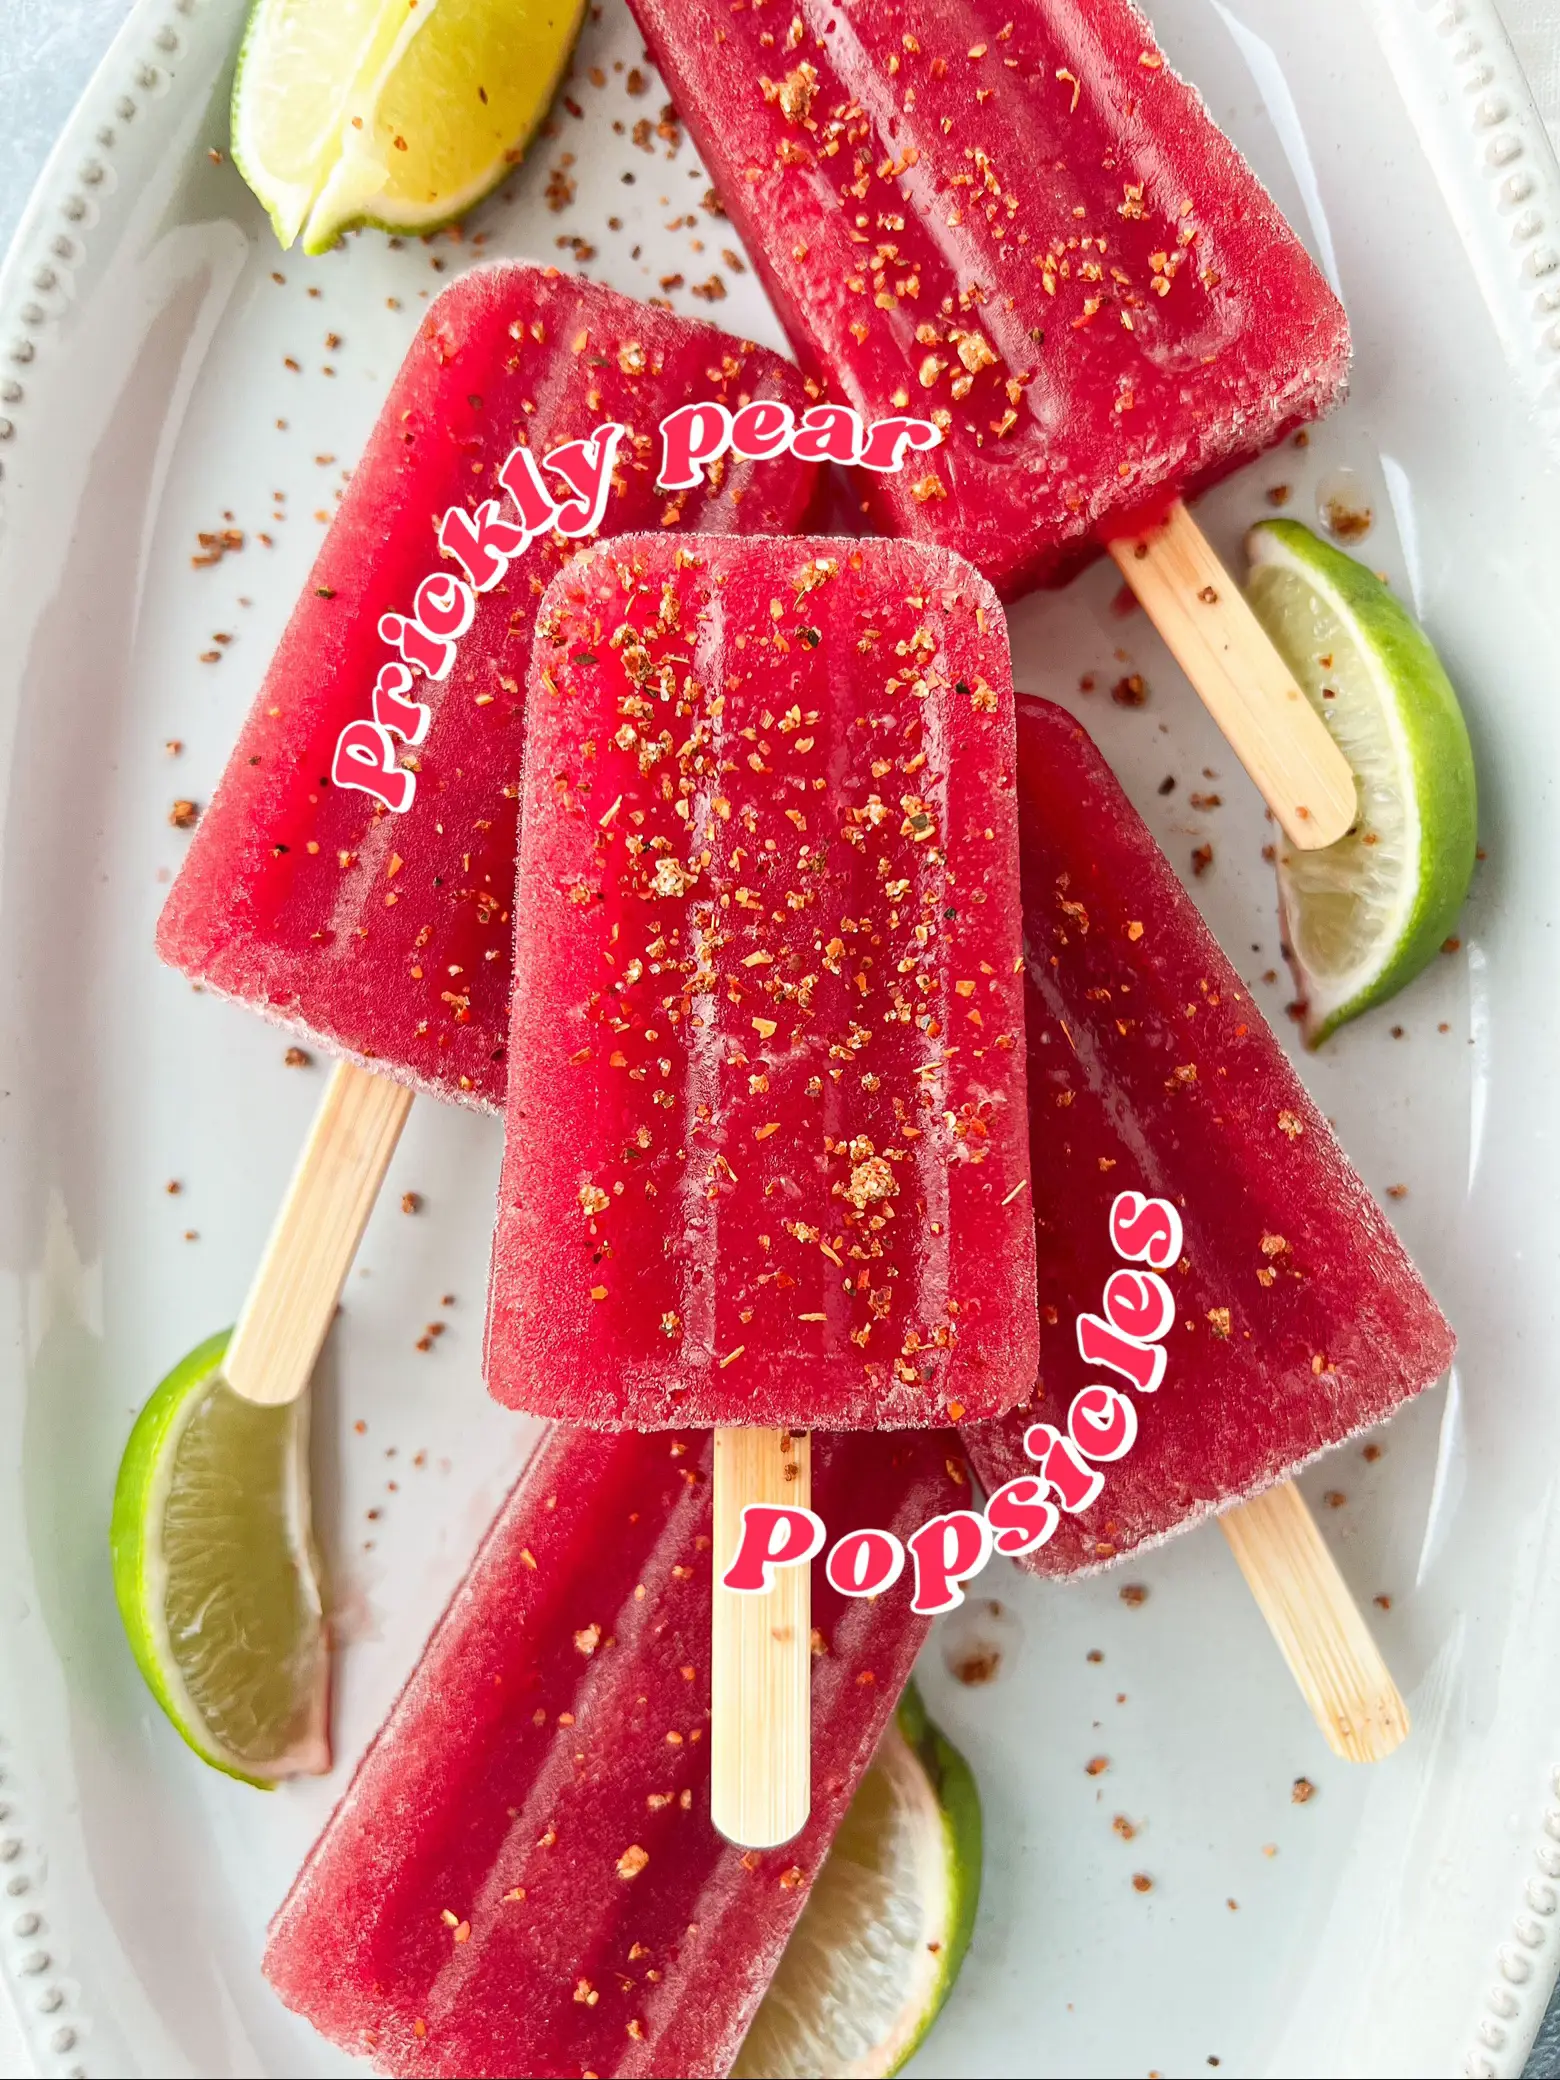 Pear Popsicles for Dogs - USA Pears